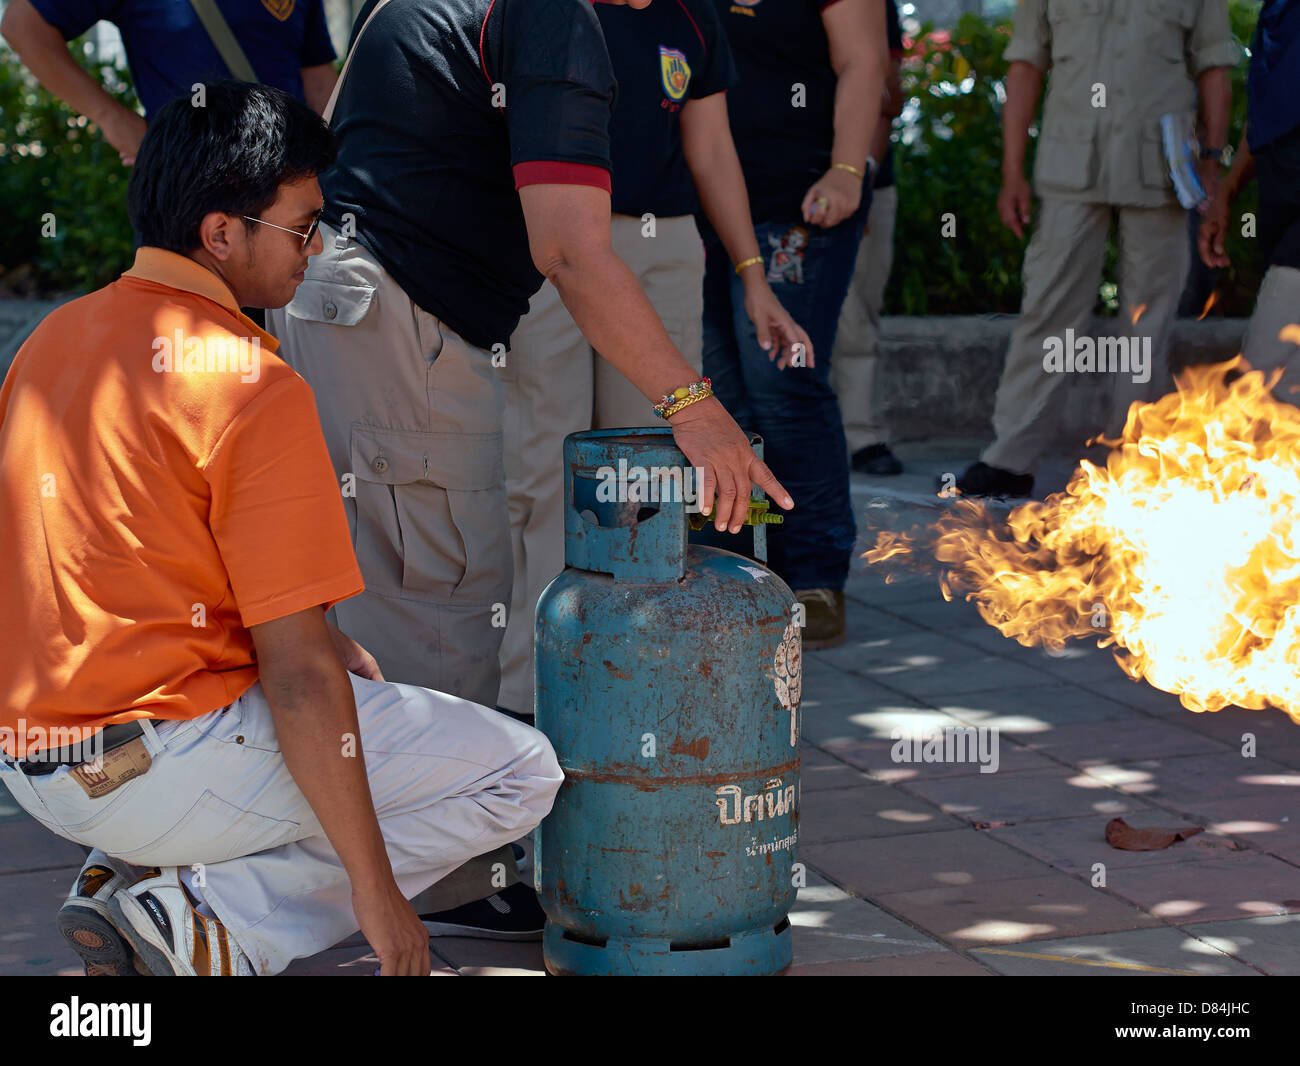 Home appliance fire safety education.Thailand fire officer demonstrating the safe method to extinguish flame from a propane gas bottle. Stock Photo